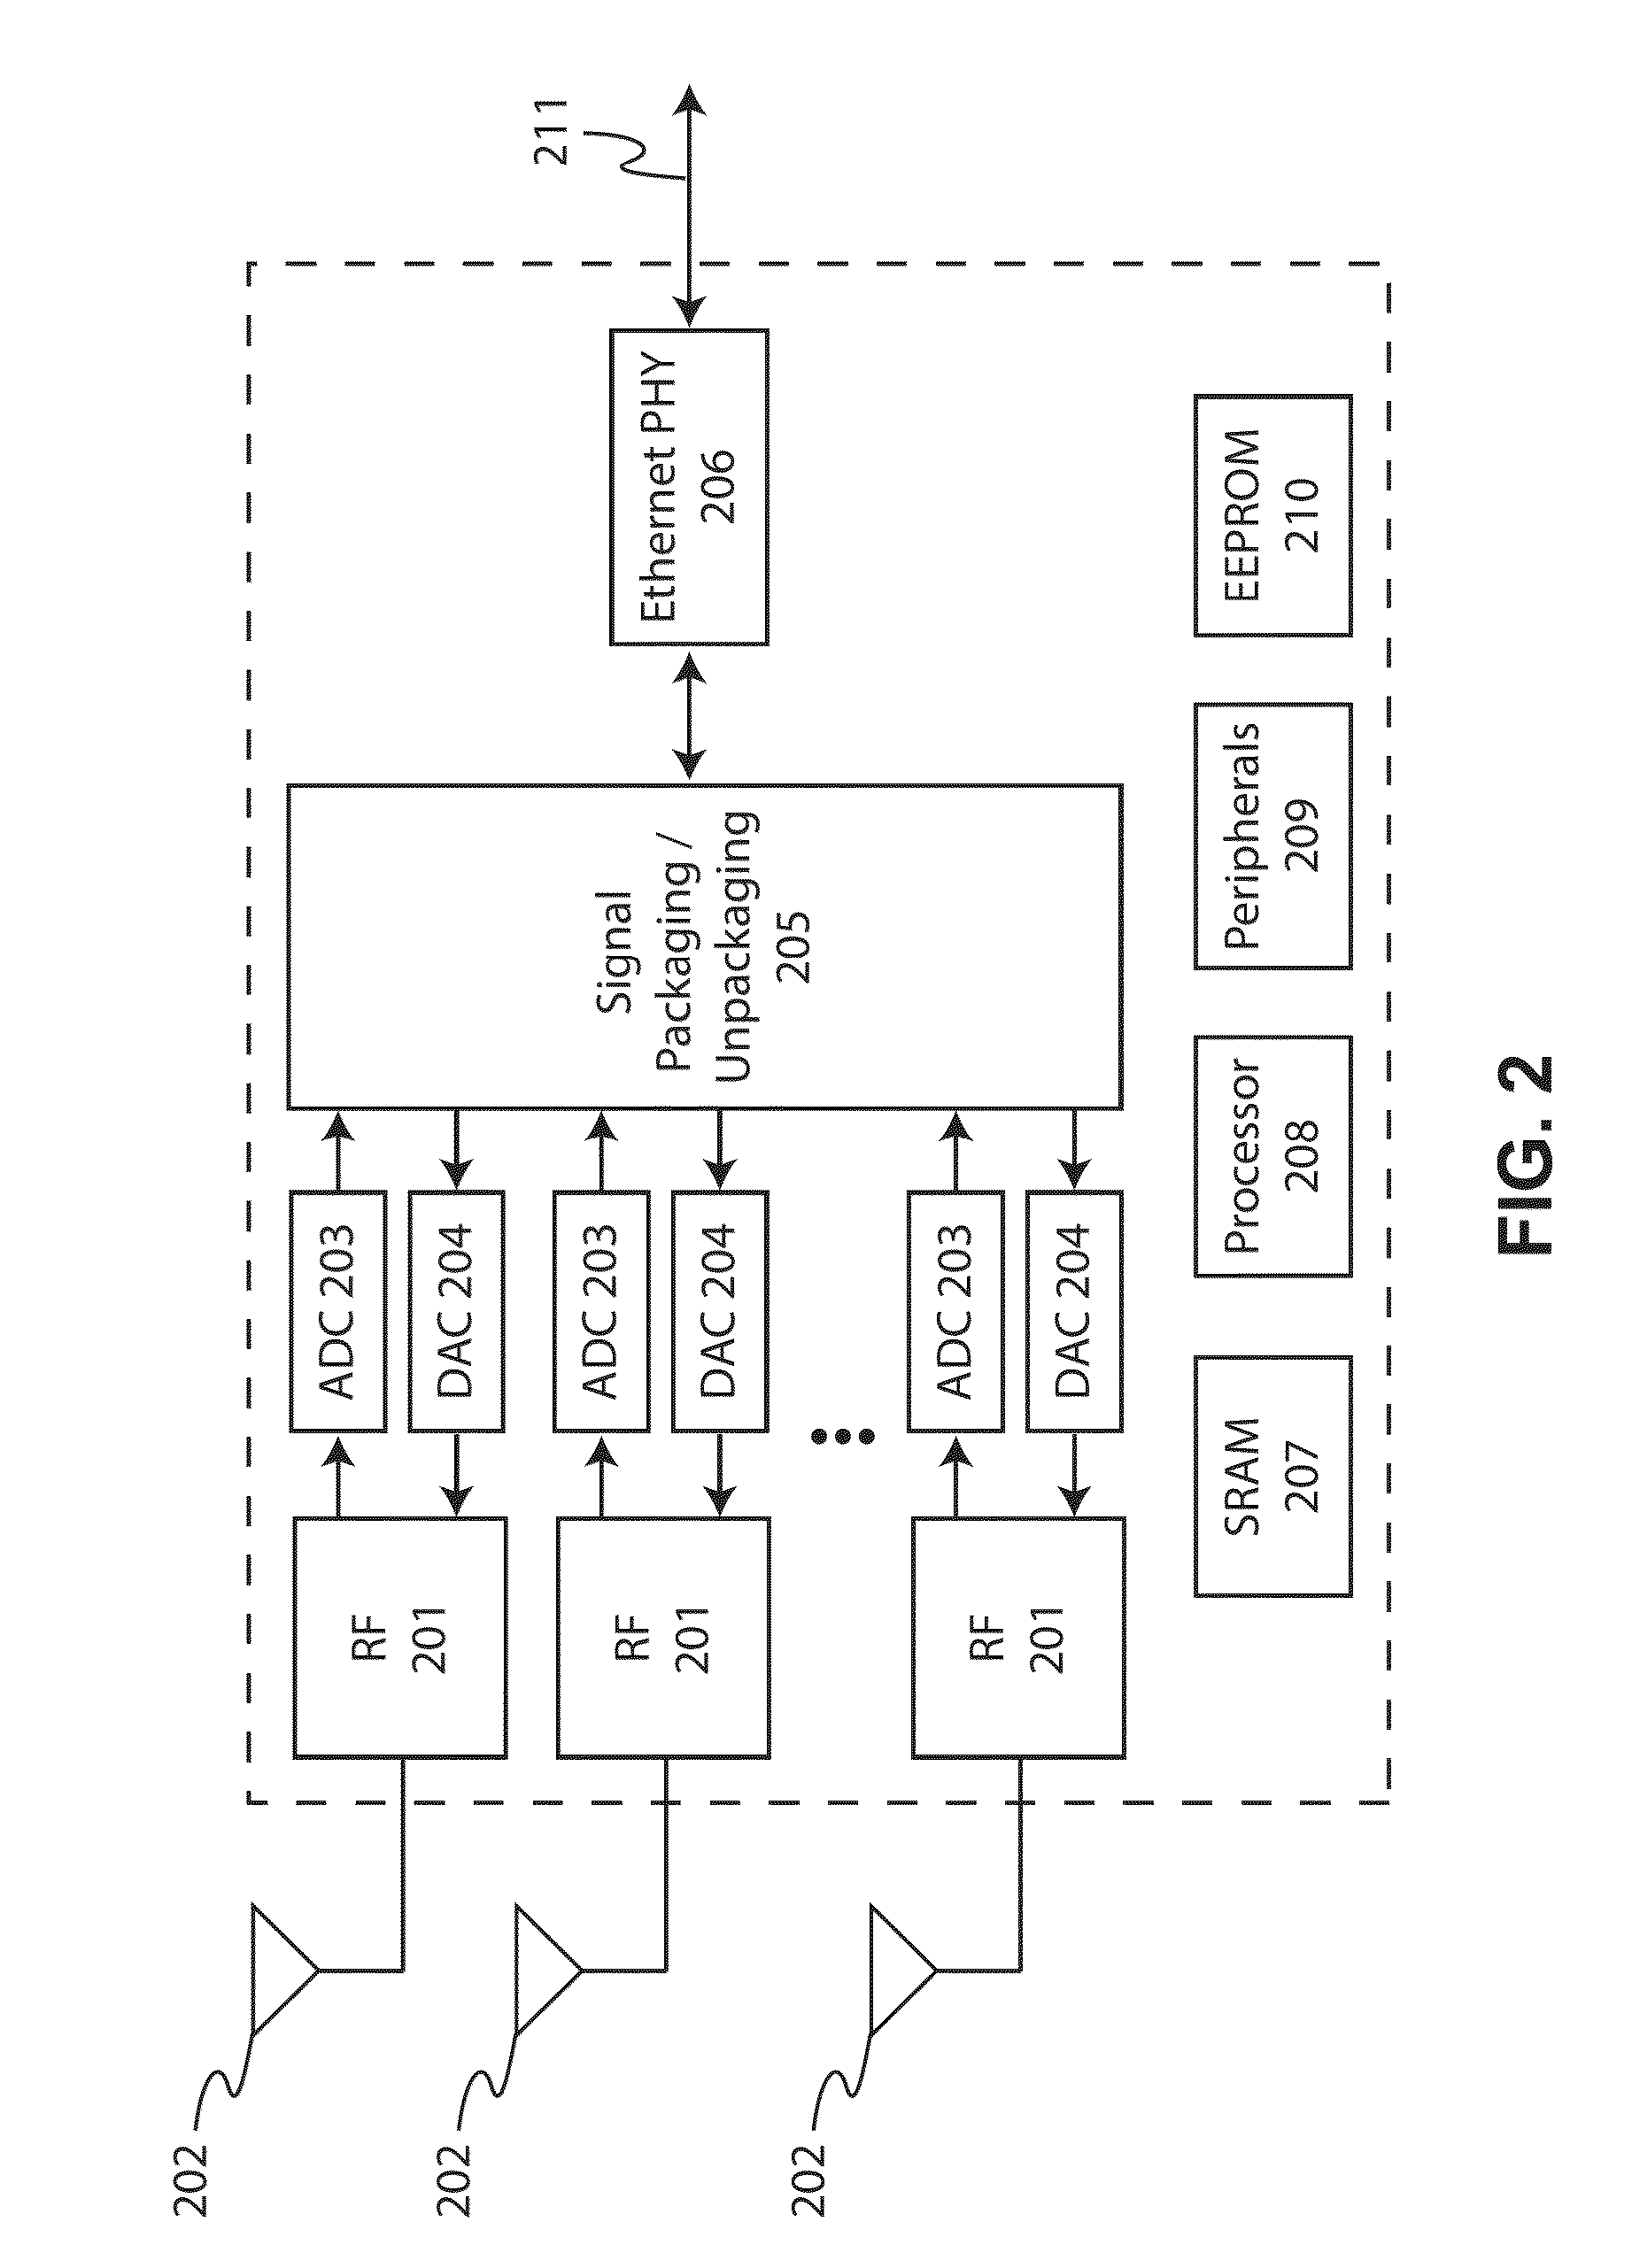 System and methods for simultaneous communication with multiple wireless communication devices